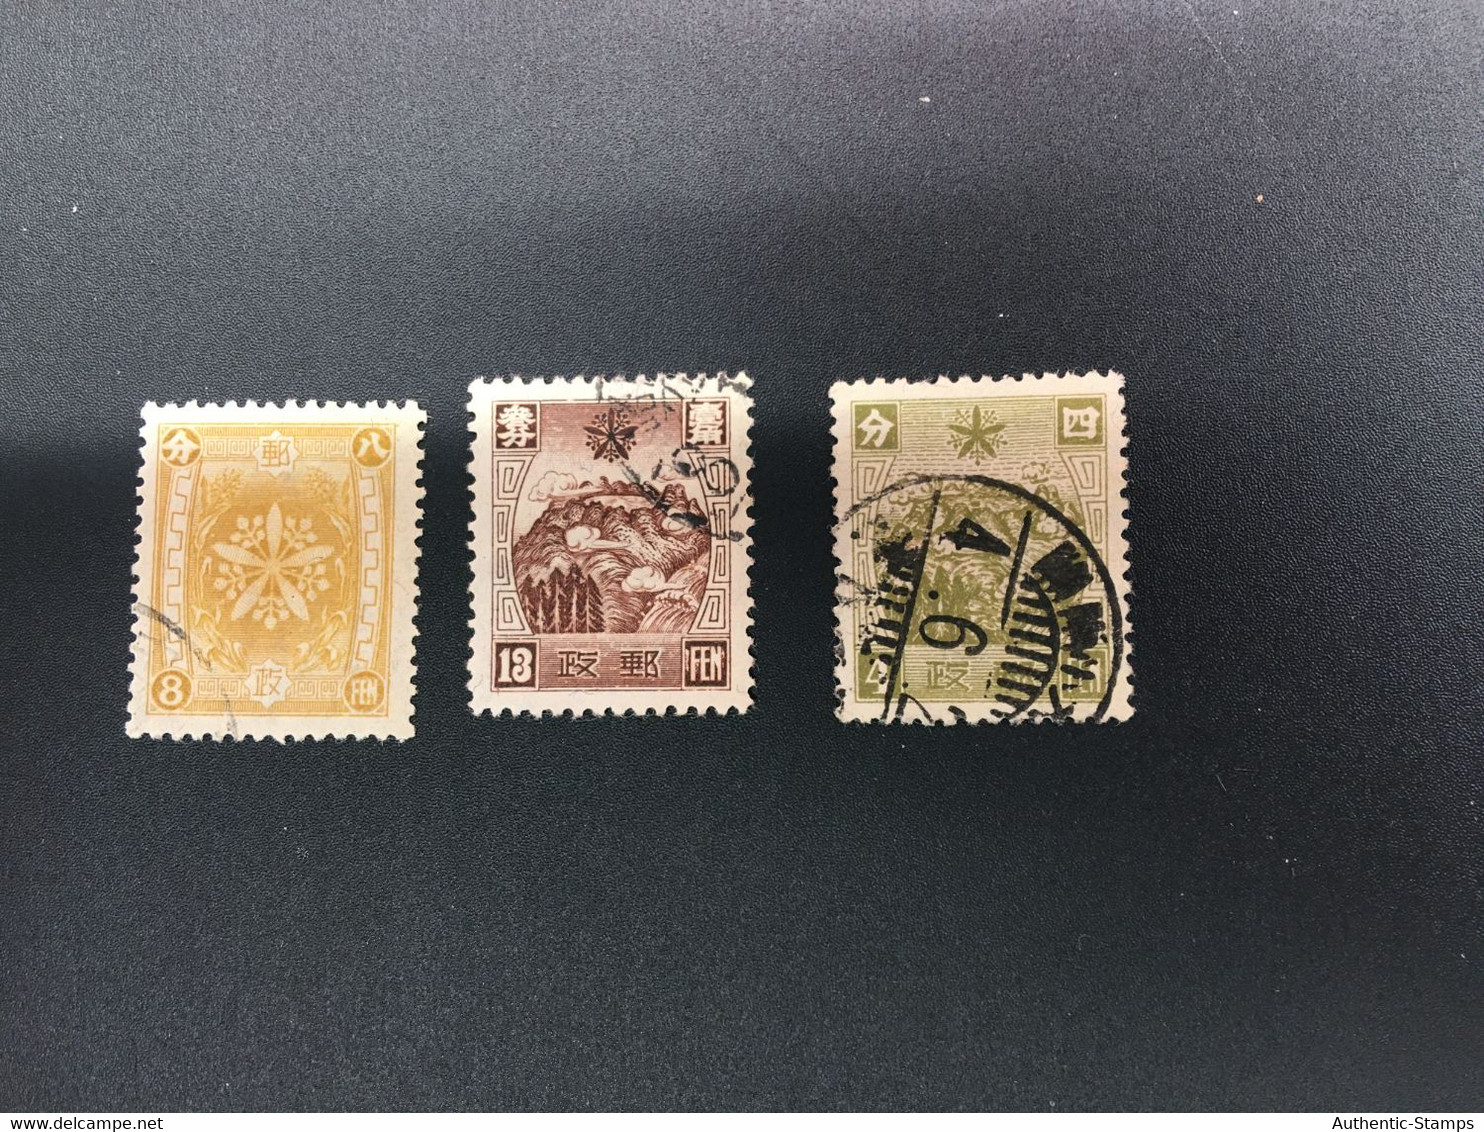 CHINA STAMP,  TIMBRO, STEMPEL,  CINA, CHINE, LIST 8592 - 1932-45 Mandchourie (Mandchoukouo)